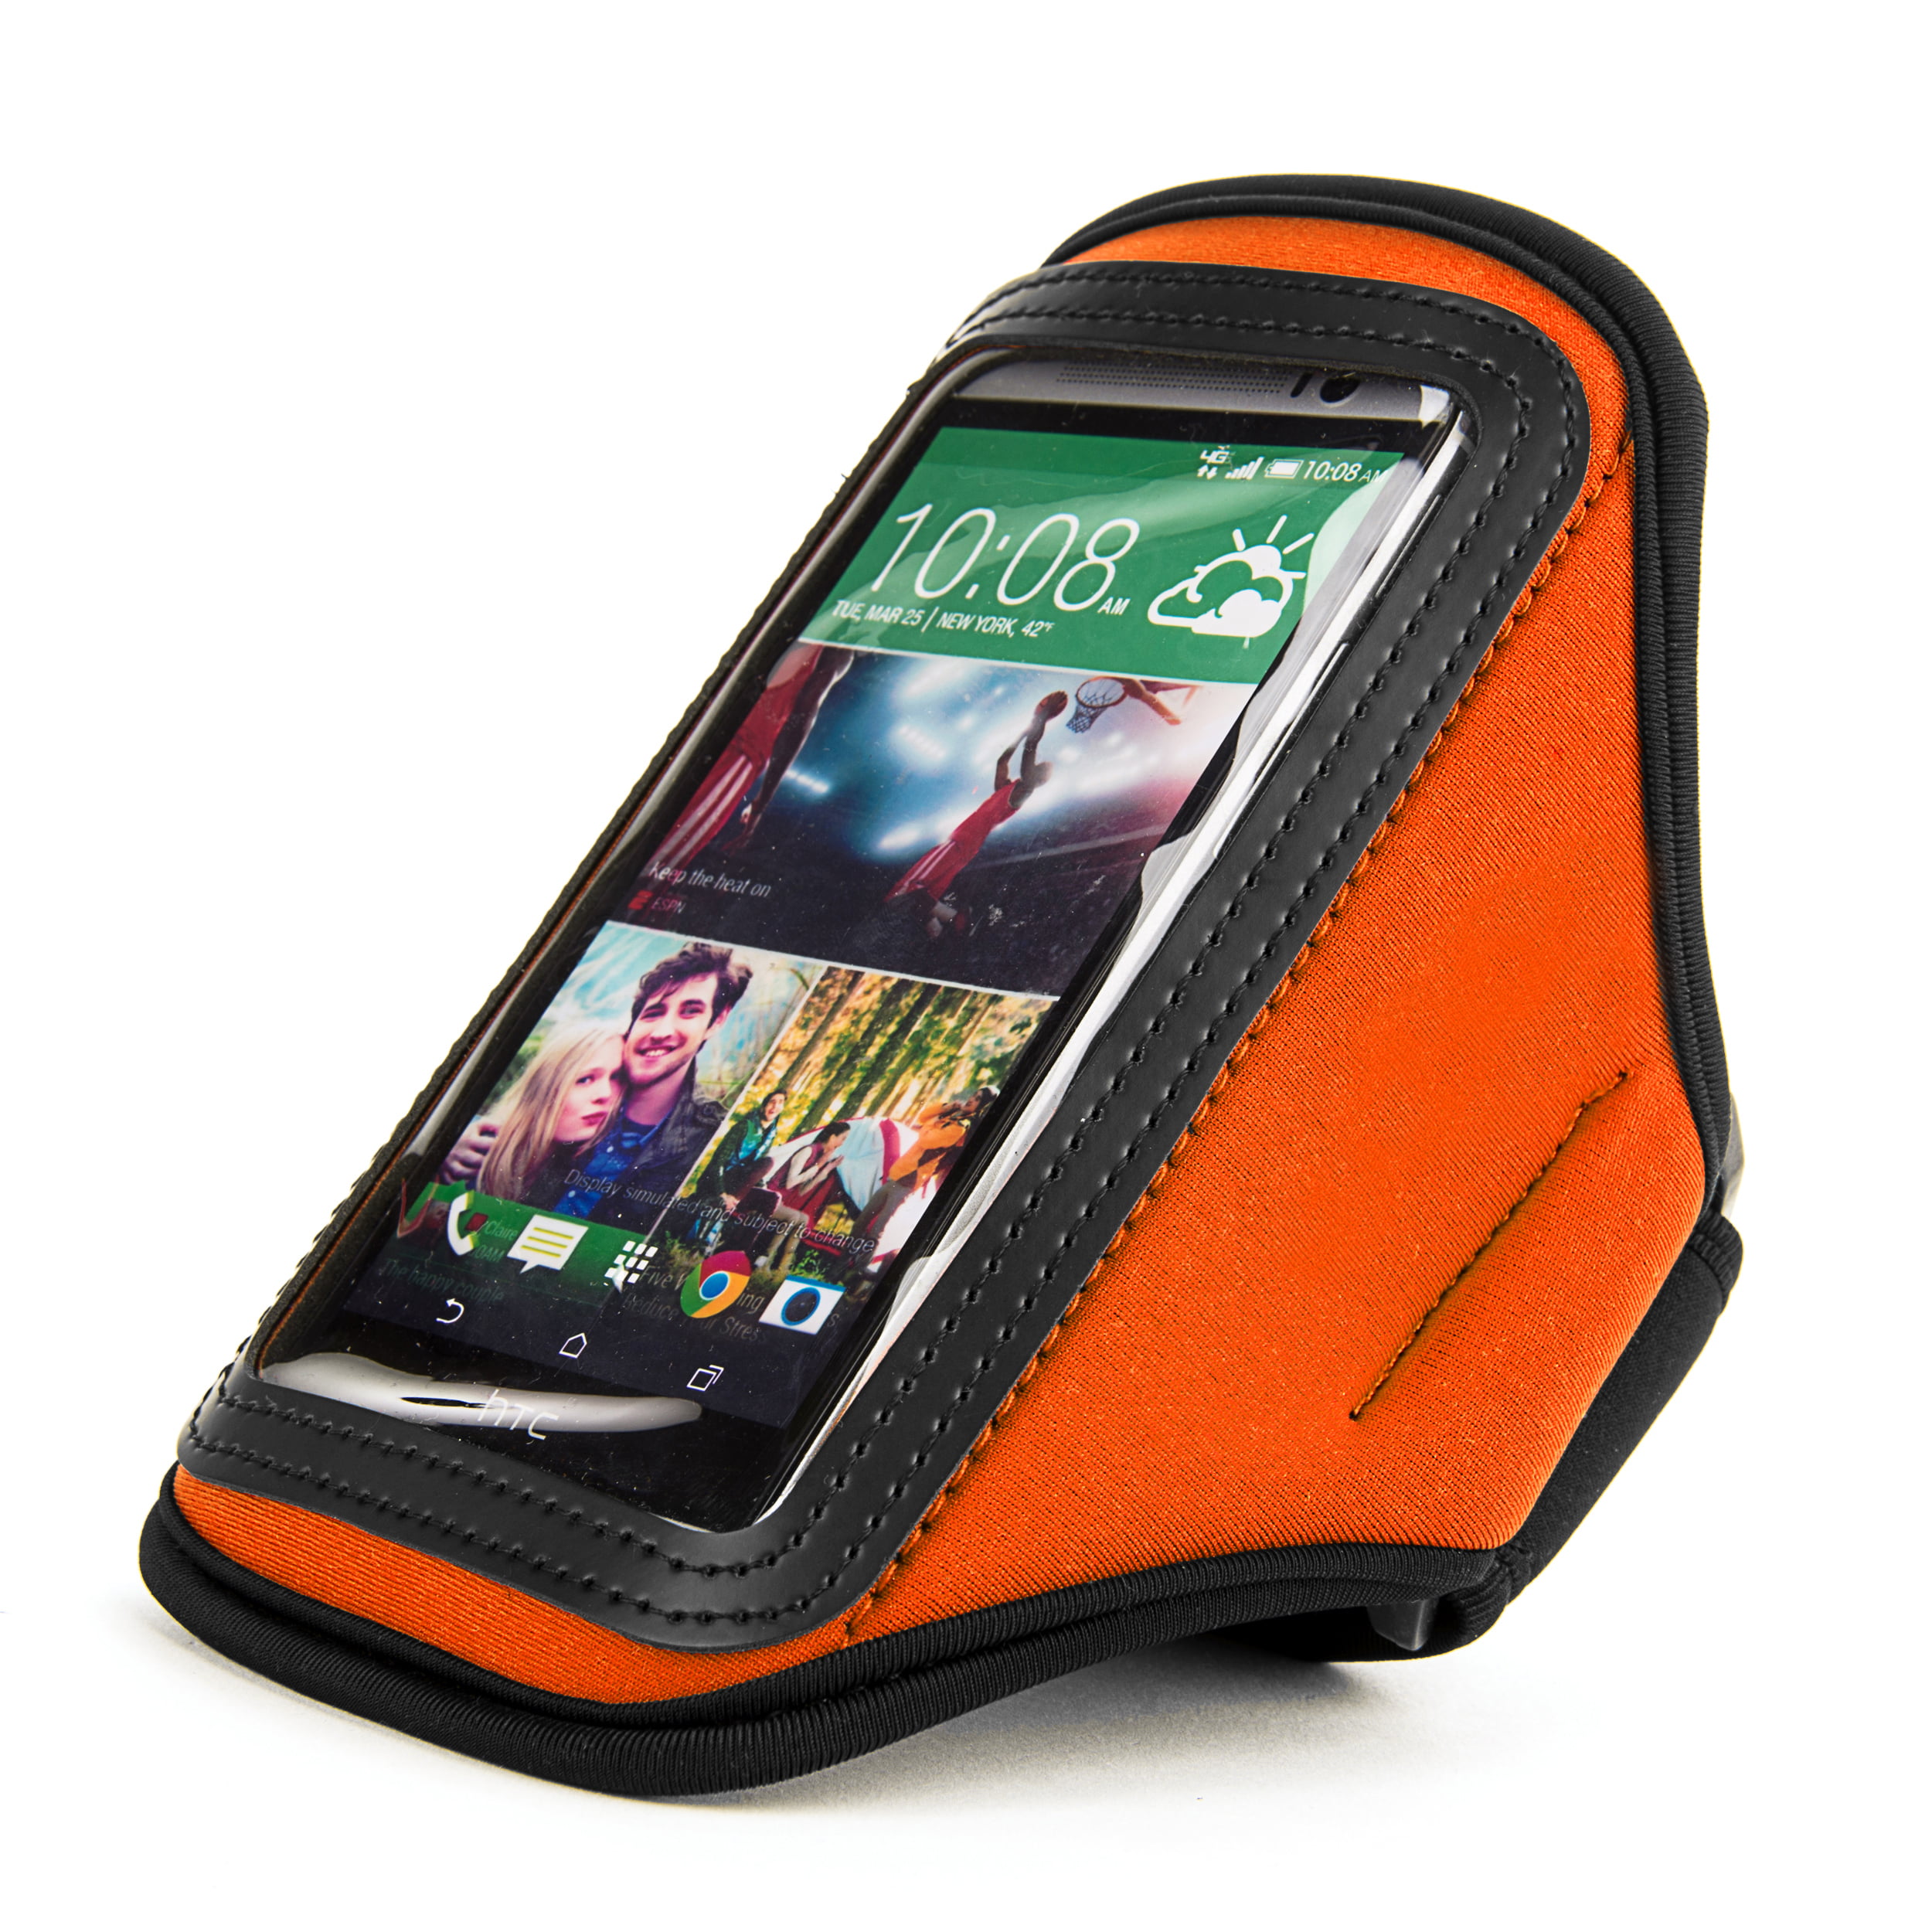 show original title Details about   Gym Sports Running Phone Holder Armband For Samsung Galaxy Plus & Note Sizes 